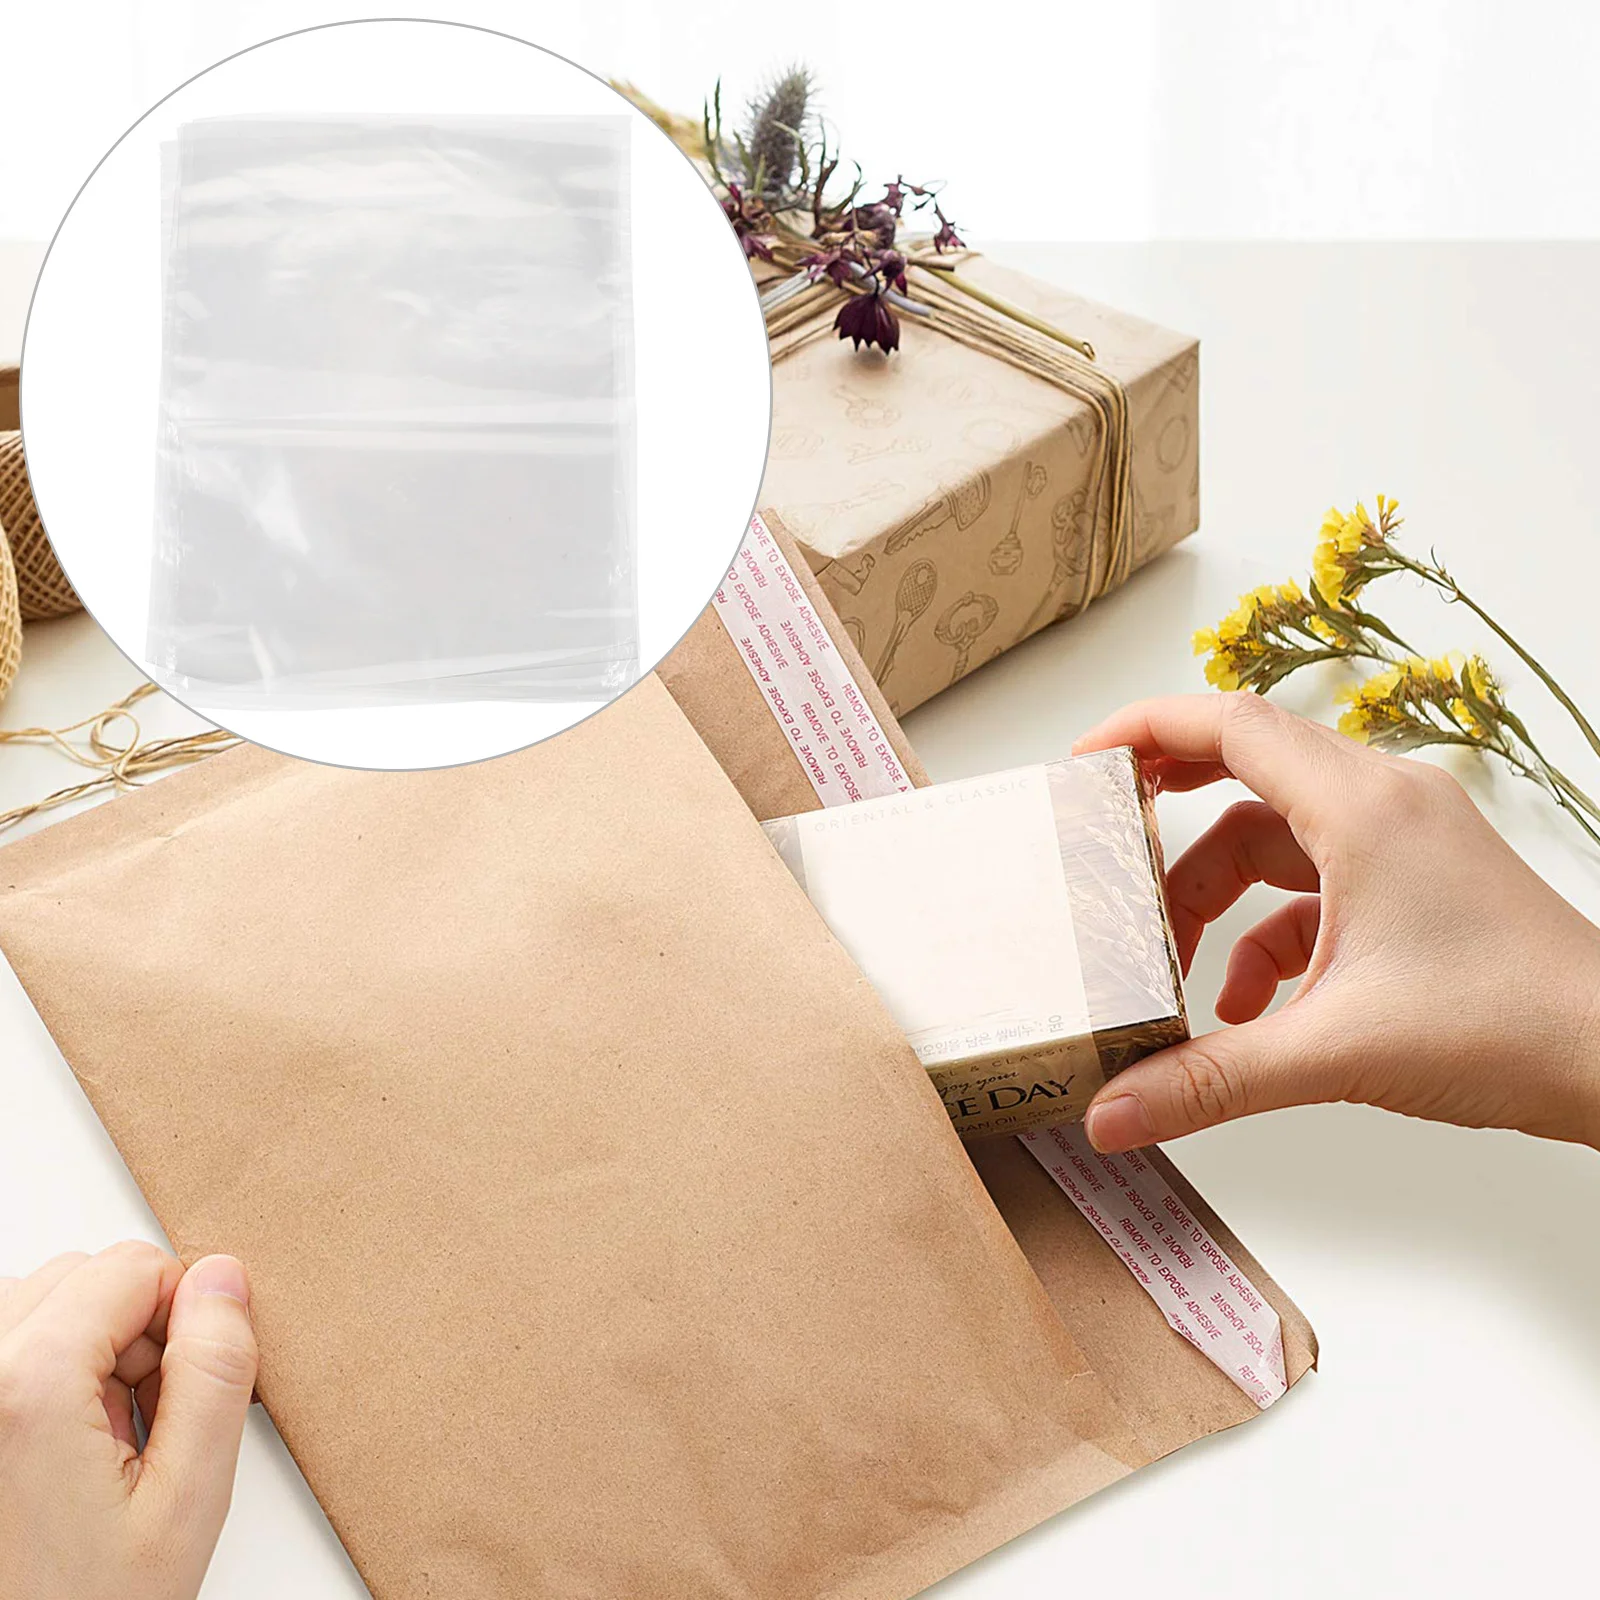 

200 Pcs Heat Shrink Film Bag Packing Paper Vacuum Shrinkable Wrapping Household New Material Bags Packaging Sealer